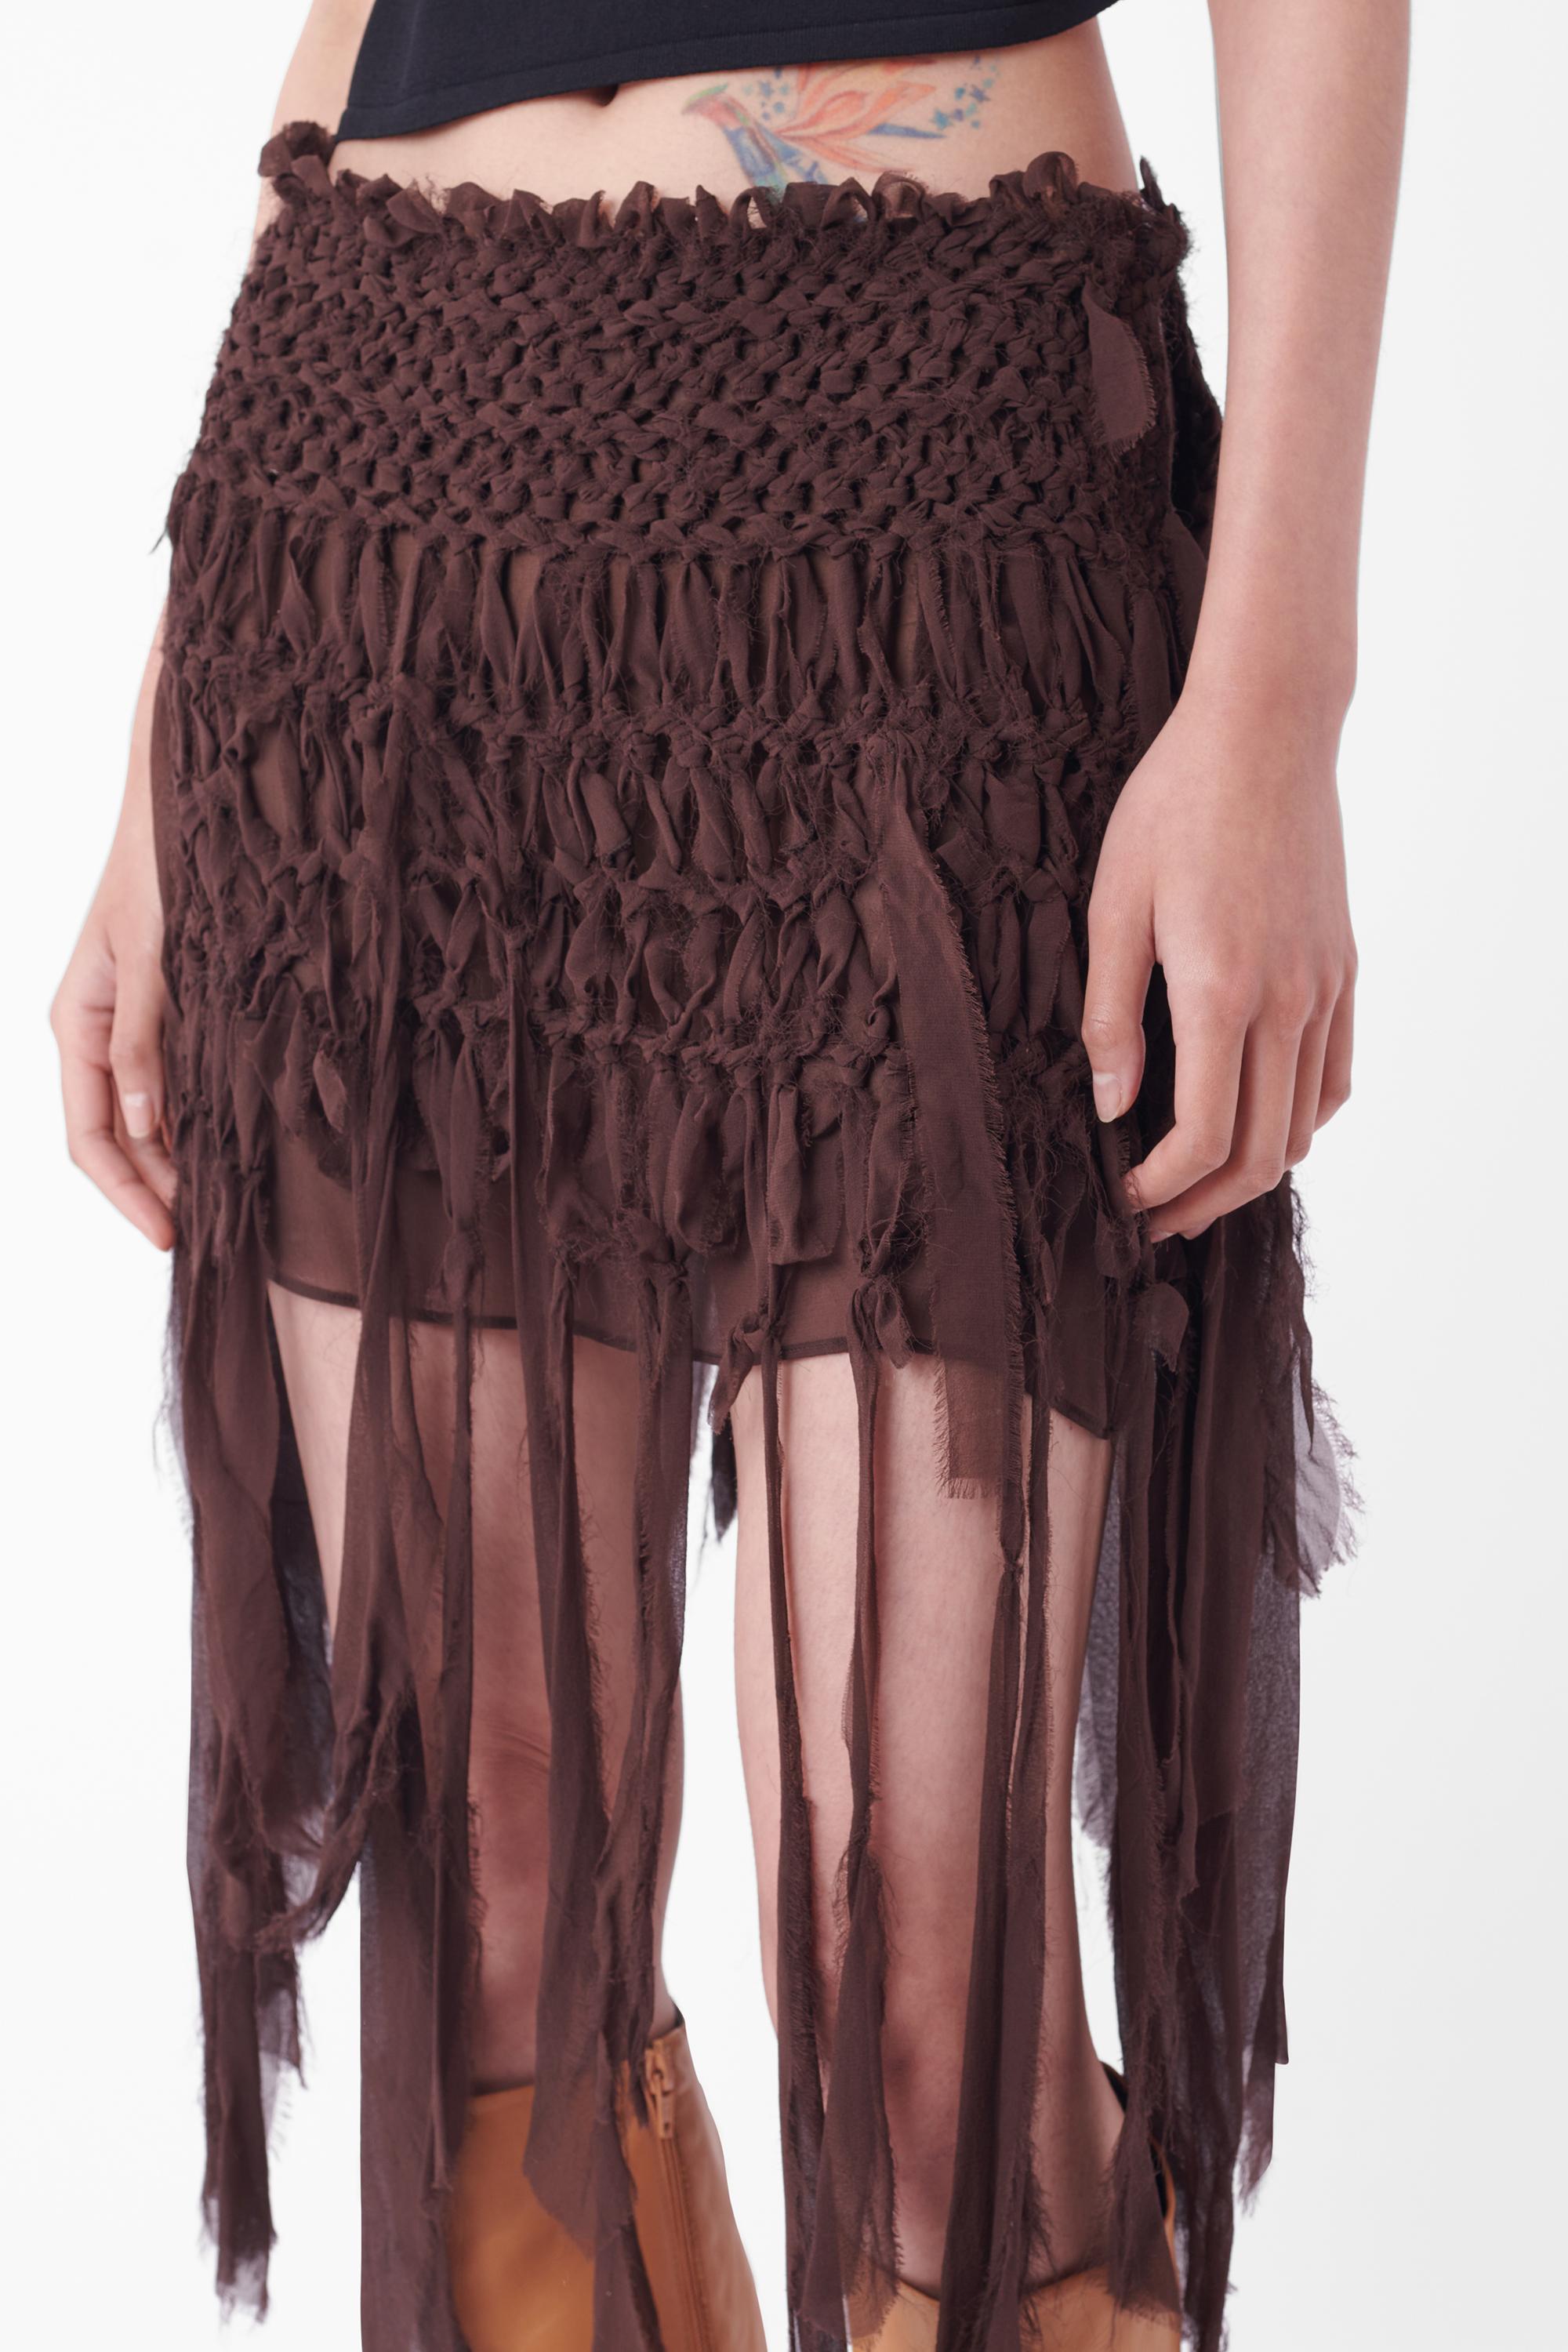 We are excited to present this Tom Ford for Yves Saint Laurent Spring Summer 2002 mombasa silk safari skirt, as seen on the runway - look 33. Features invisible side zip closure, sheer under layer with woven silk overlay and fringe. In great vintage